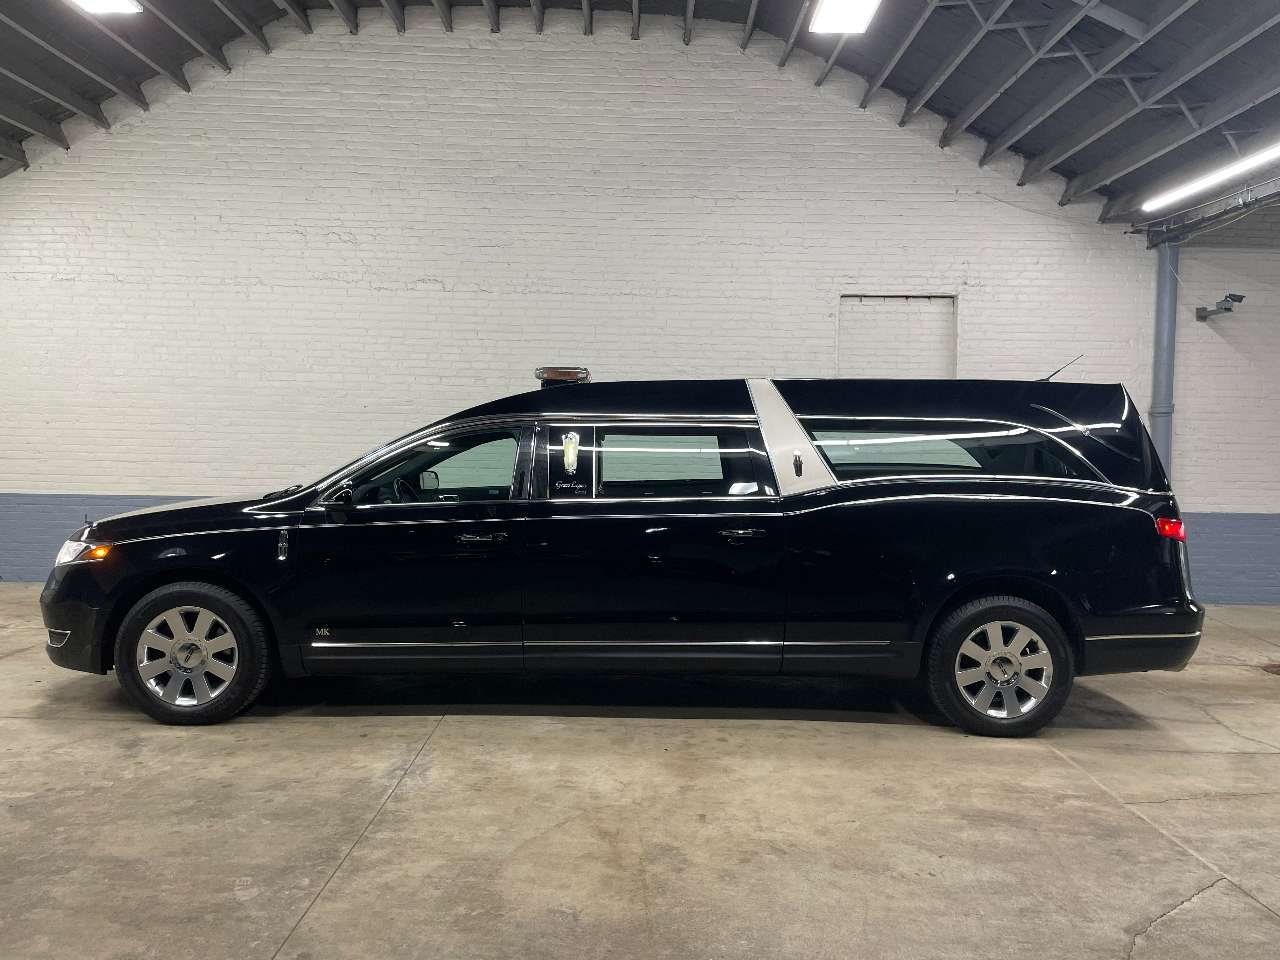 2017 Lincoln MK Grand Legacy Limited Hearse 1663948680248